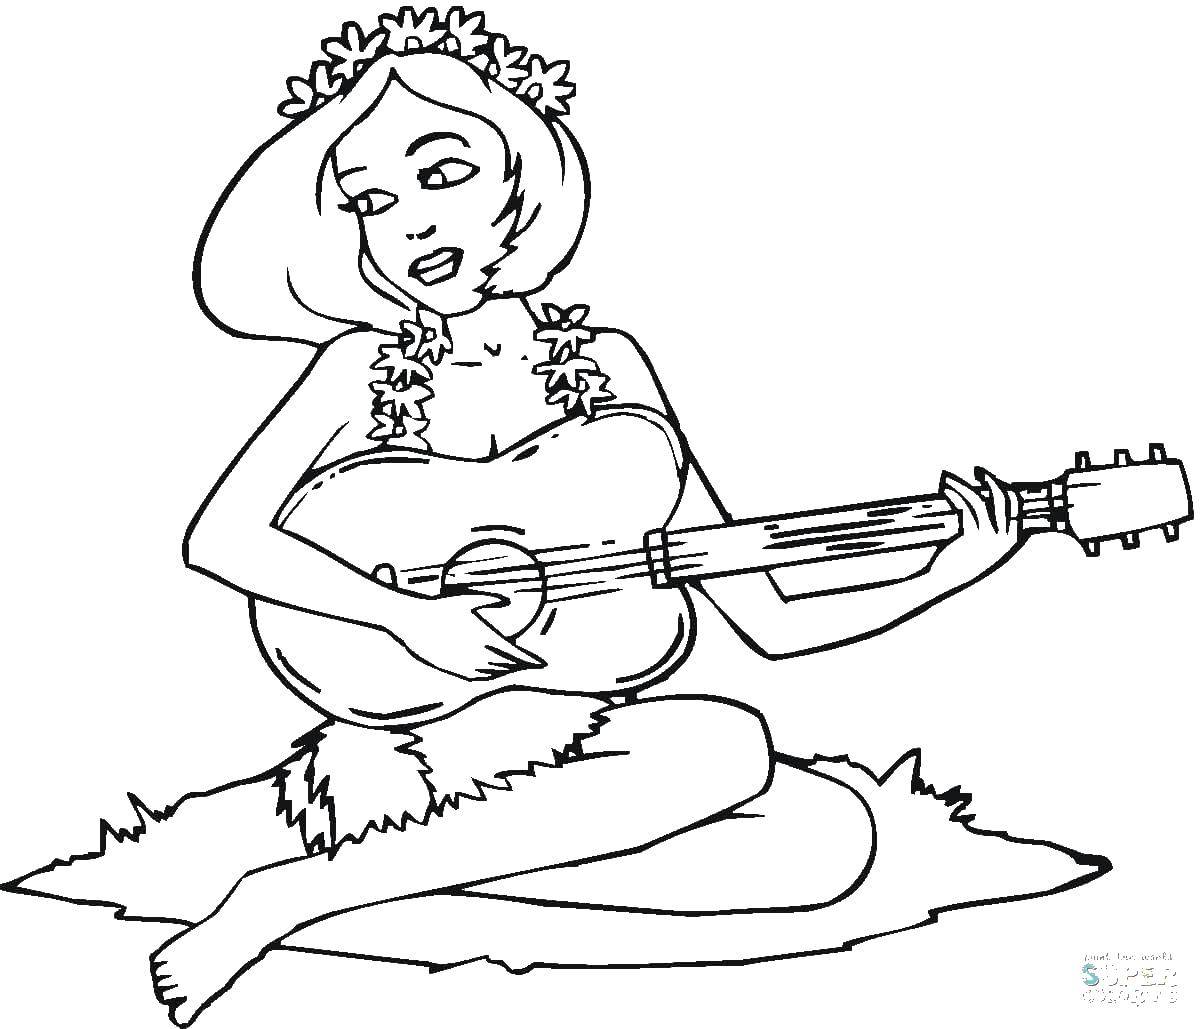 Coloring Girl playing the guitar. Category Music. Tags:  girl, guitar.